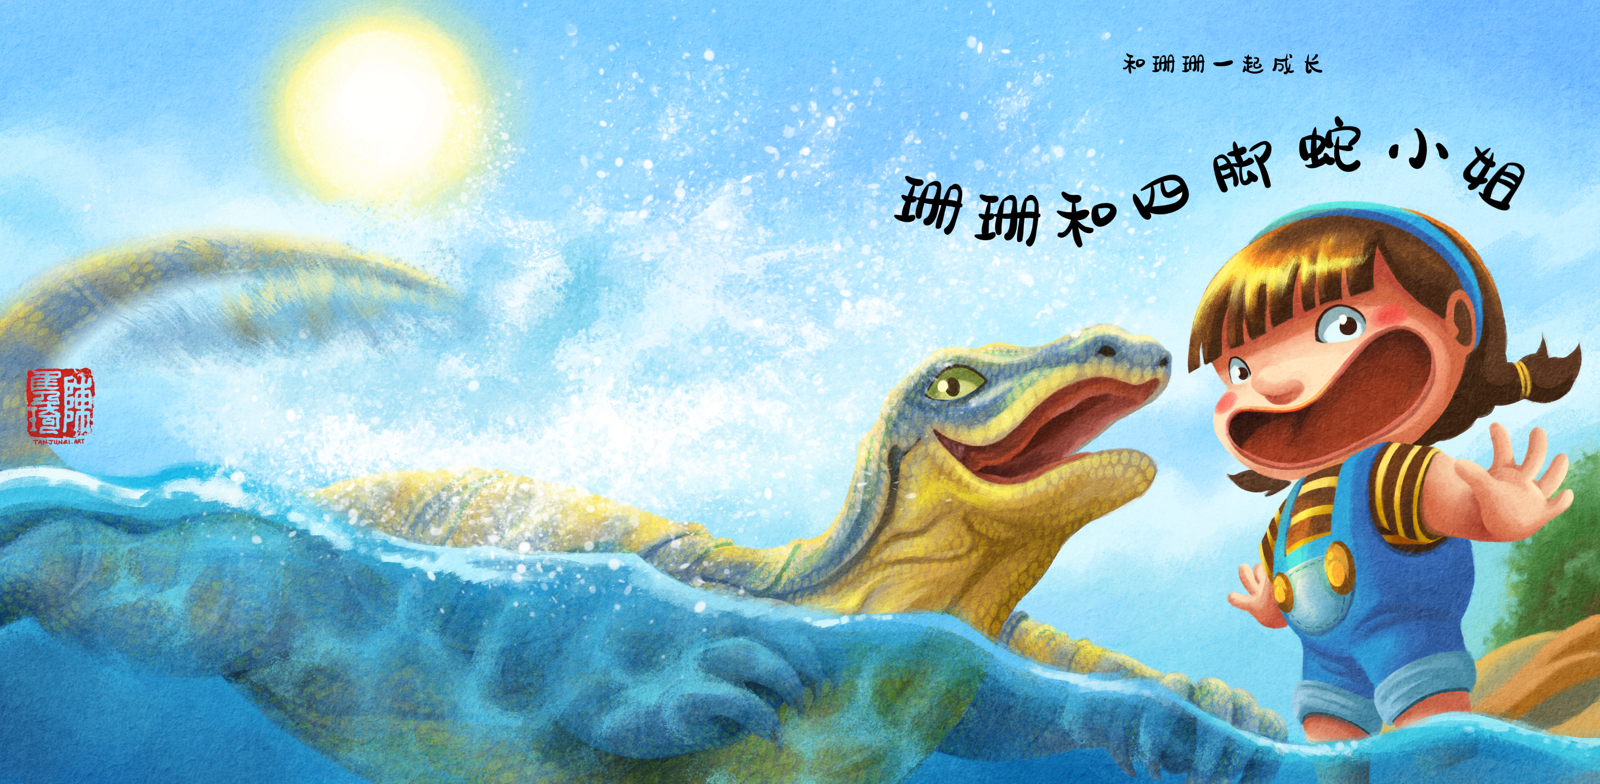 Book cover design (chinese version) of the first book in the series, Shan Shan and Ms. Water Monitor. It shows Shan Shan and Ms. Water monitor having a splash at the beach, looking happily at the viewer.